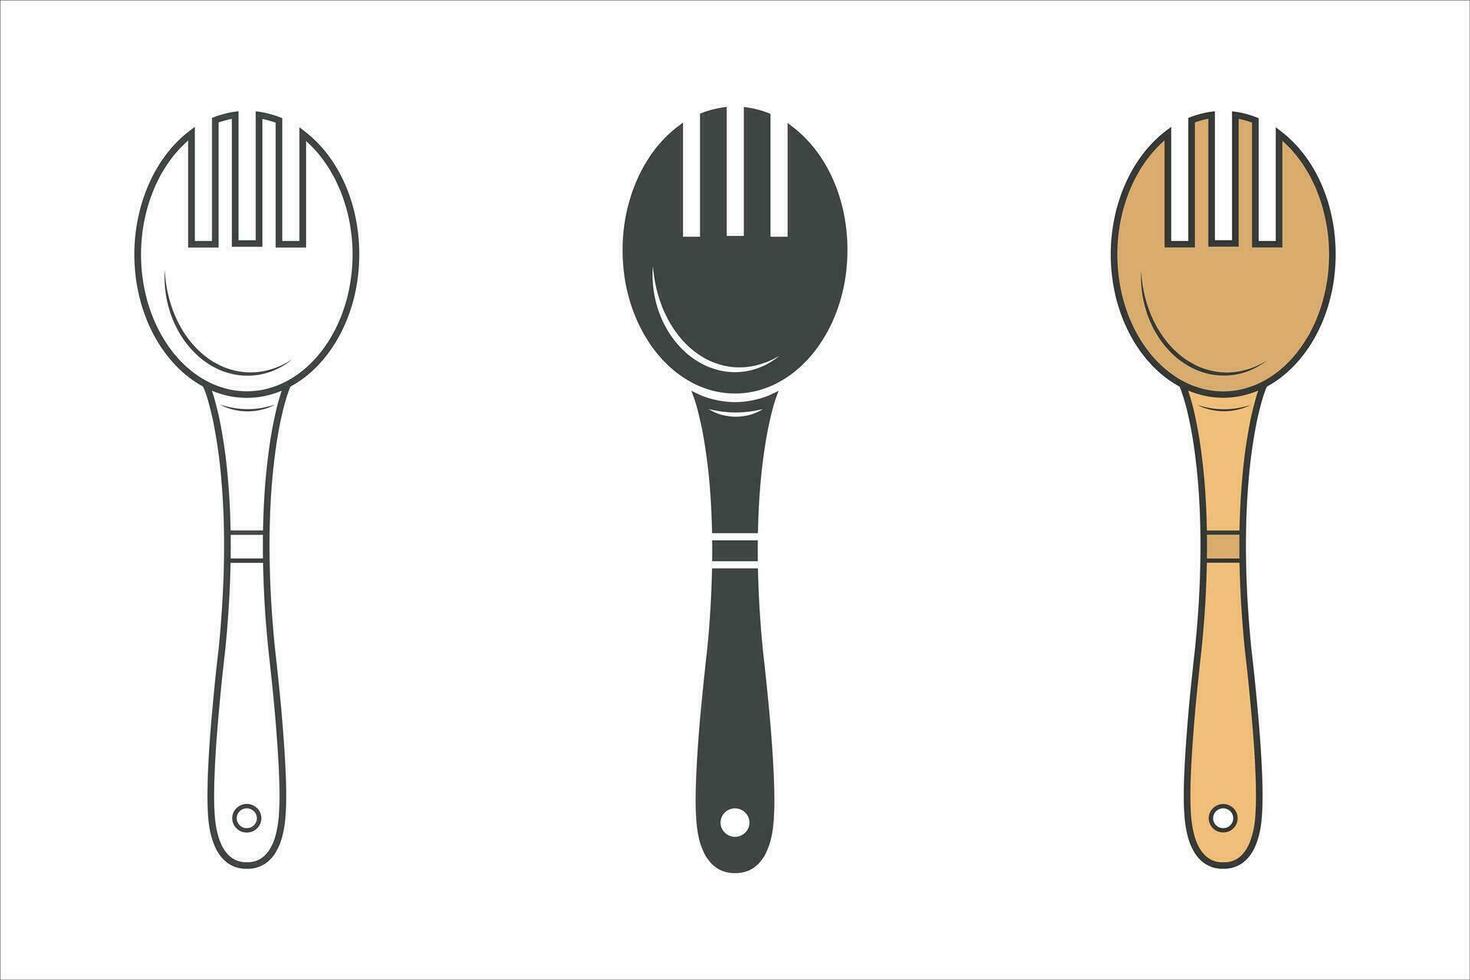 Wooden Spoon, Cooking Wooden Spoon Silhouette, Restaurant Equipment, wooden Cooking Equipment, Clip Art, Utensil, Silhouette, Wooden Equipment, Wooden Spoon Vector, Wooden Spoon illustration vector